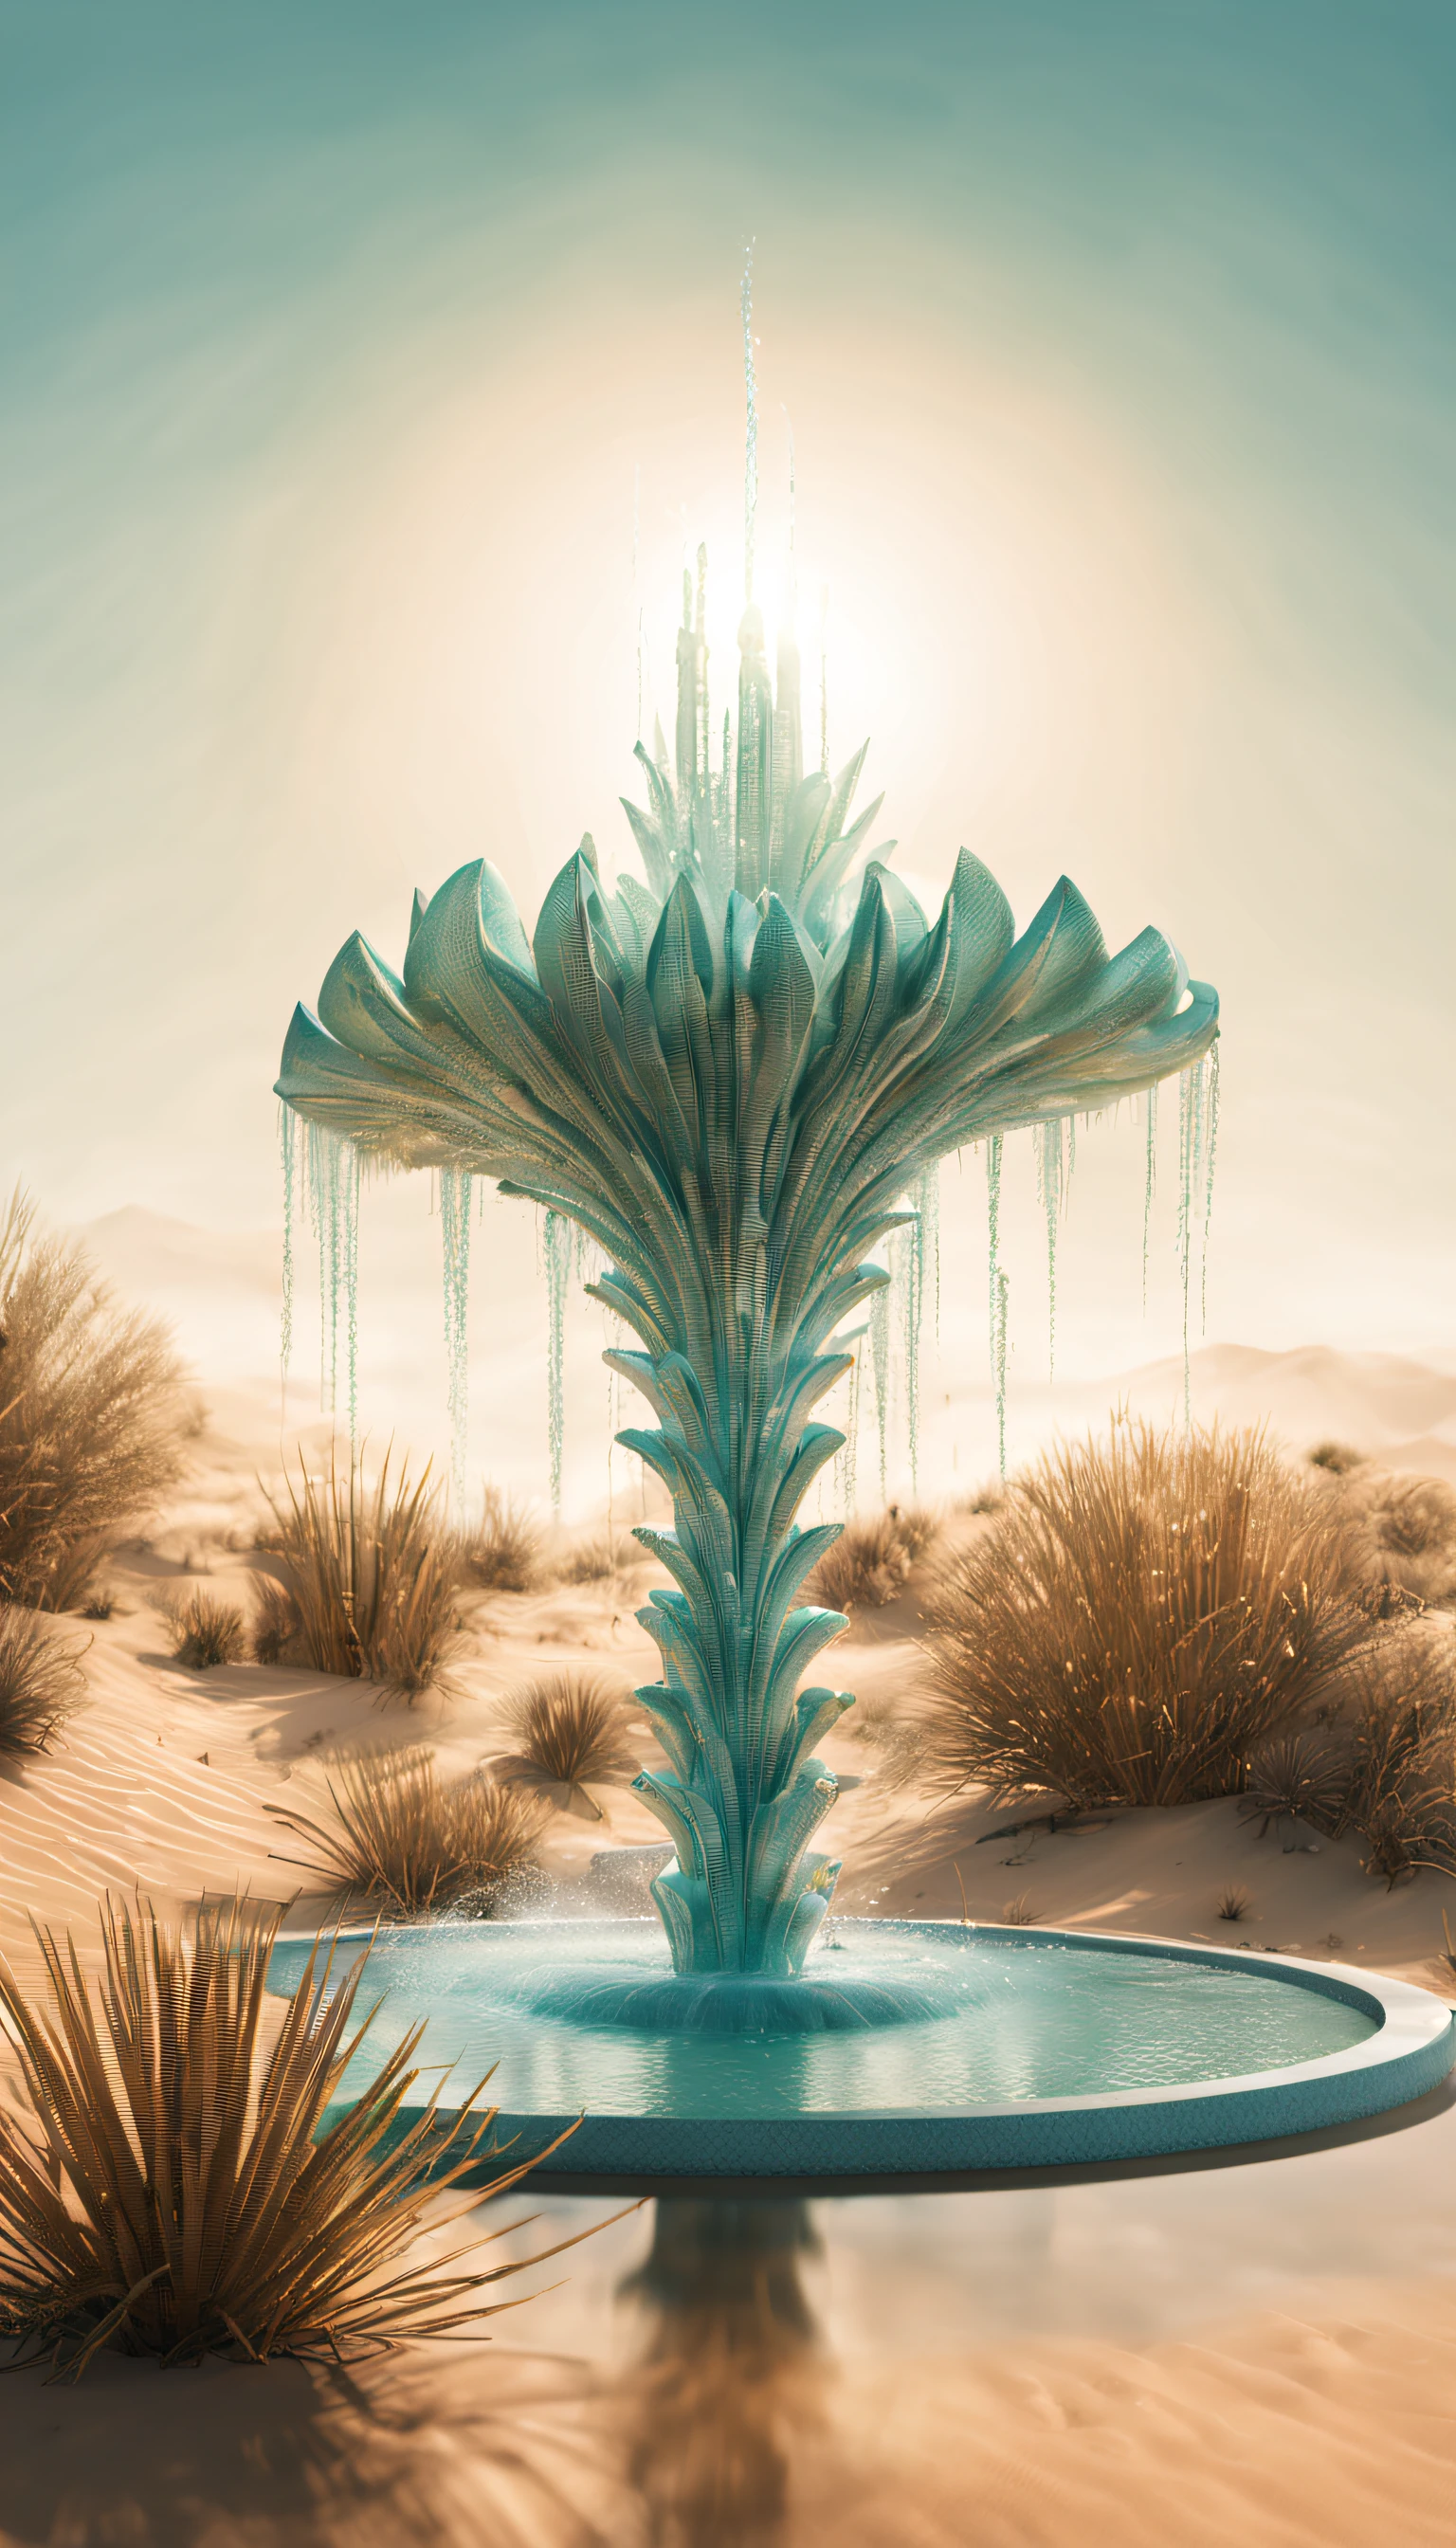 Surreal 3D rendering，Large cybernetic wishing fountain depicted in the dunes, Cactus shaped faucet sprays water, water spray，Reflection in the water，Ethereal，Super fantasy